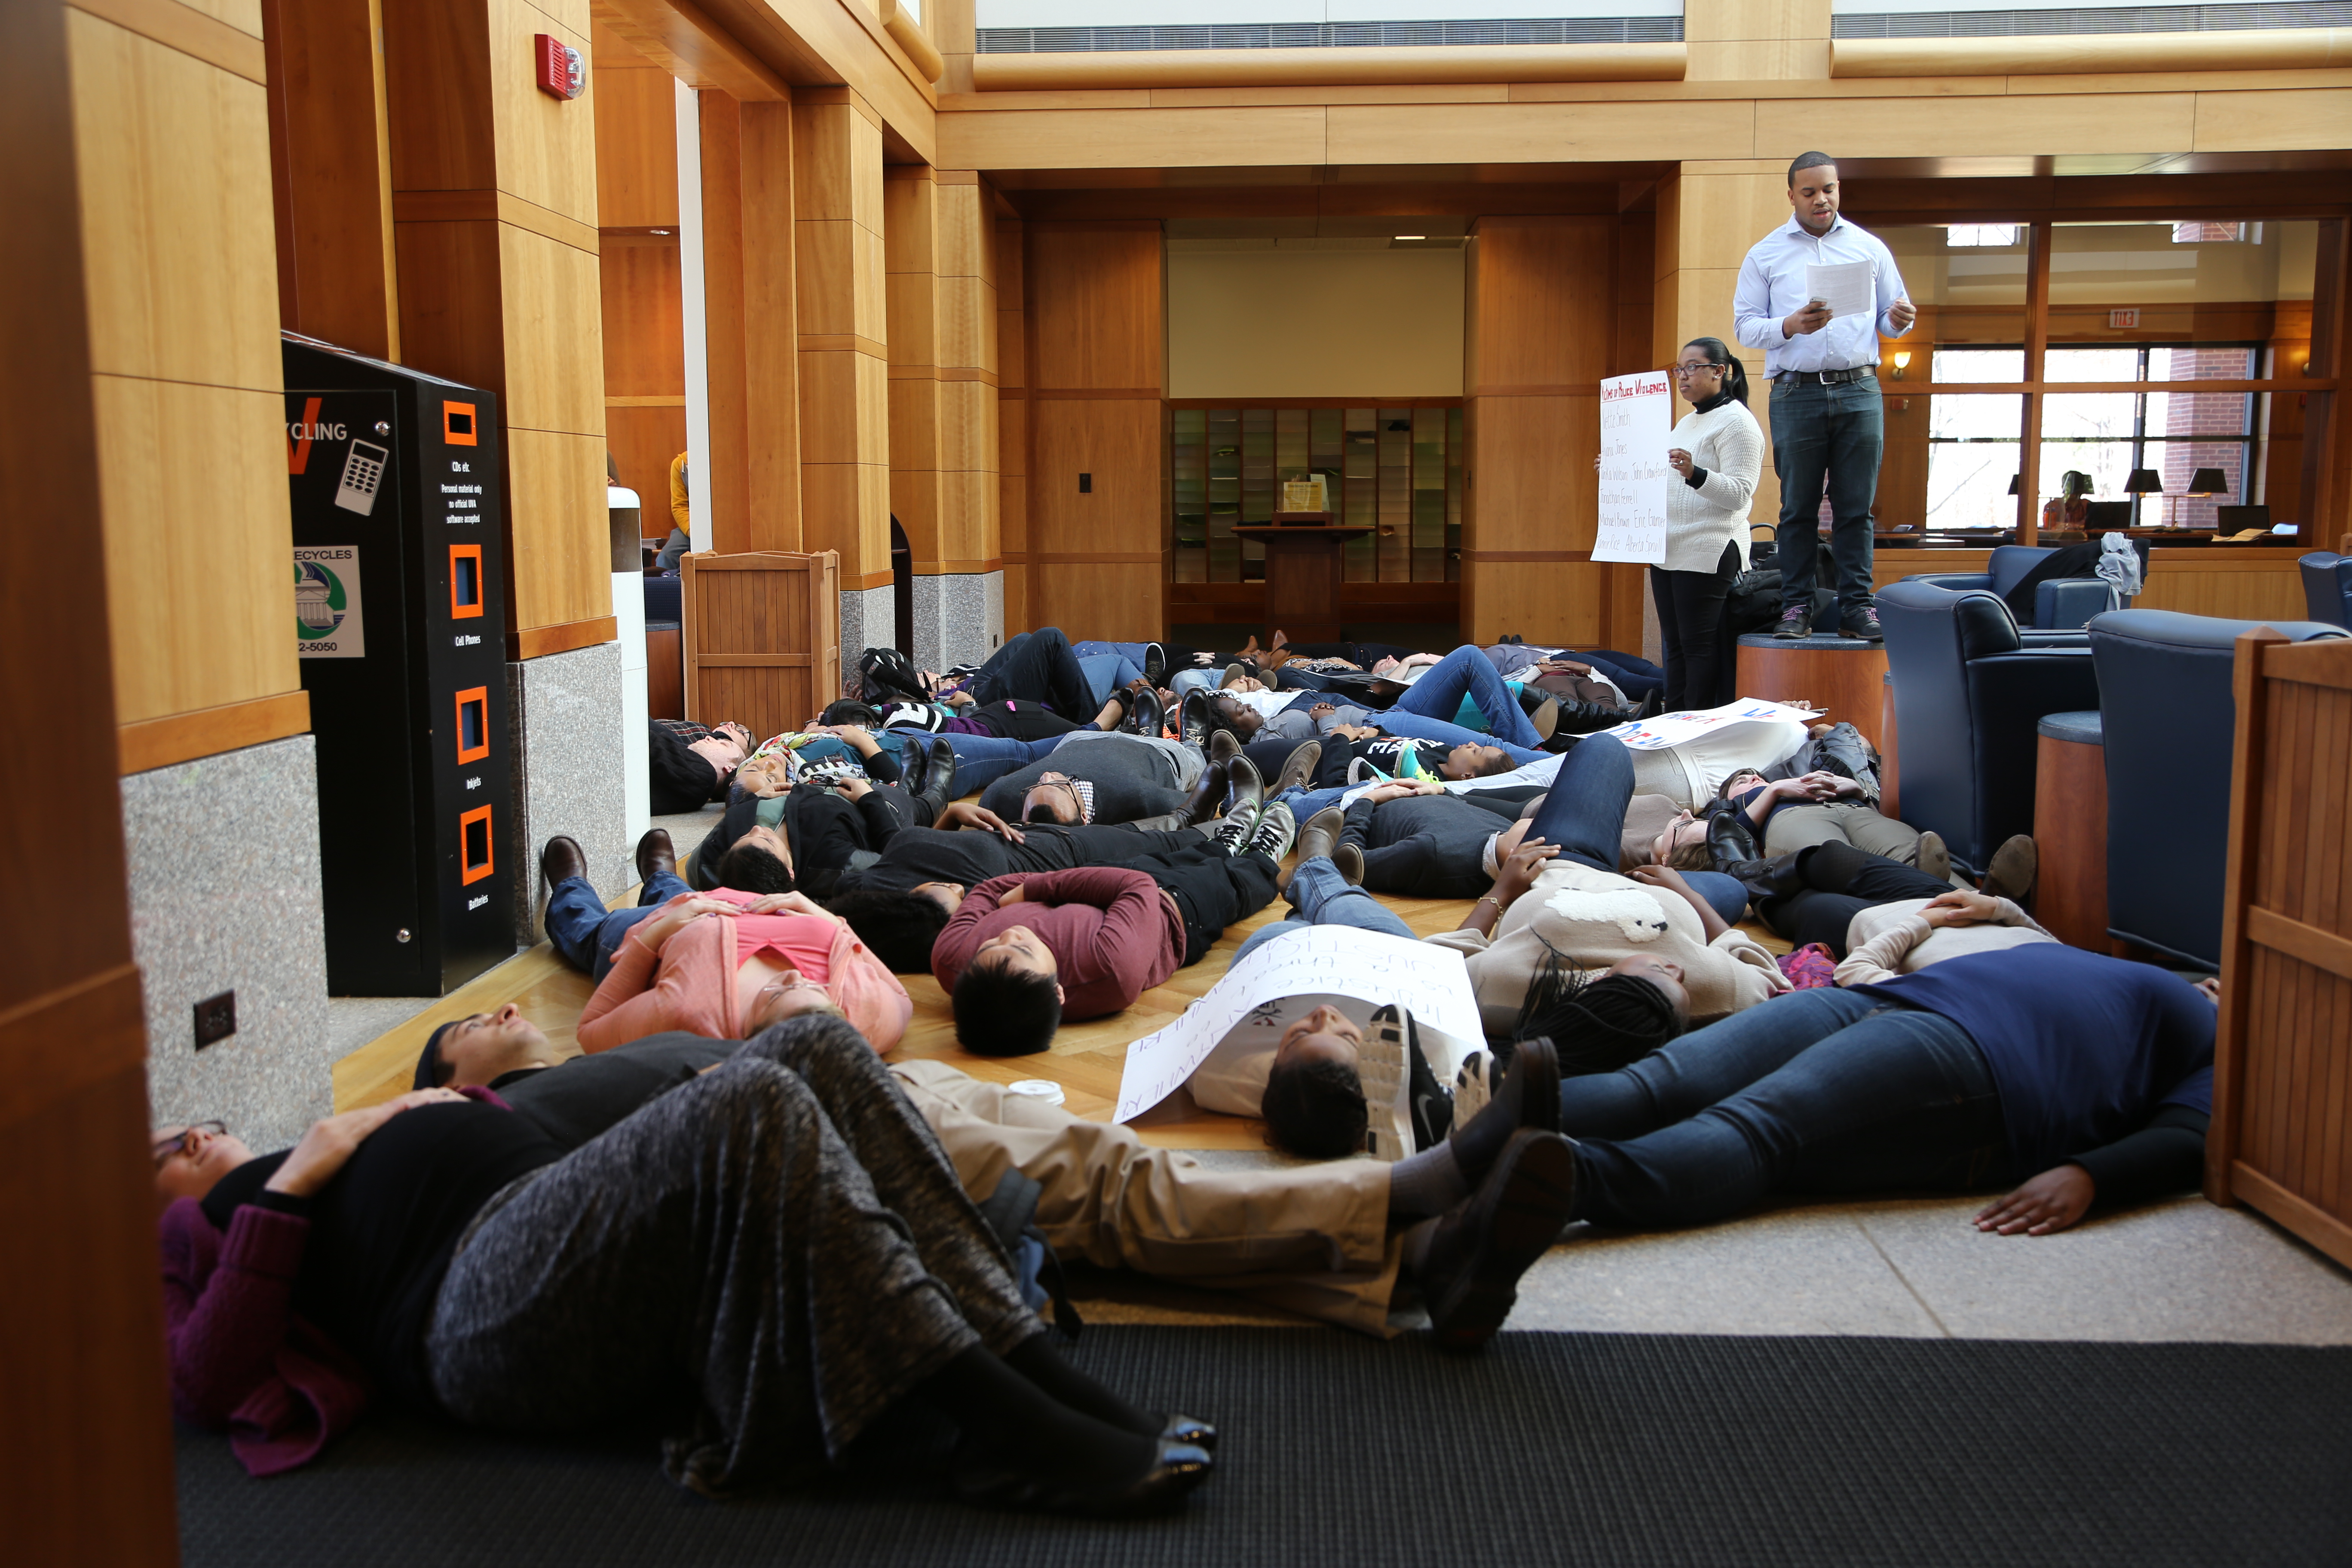 Students participate in a "Die-in" at the UVA Law School to protest police killings of African Americans.